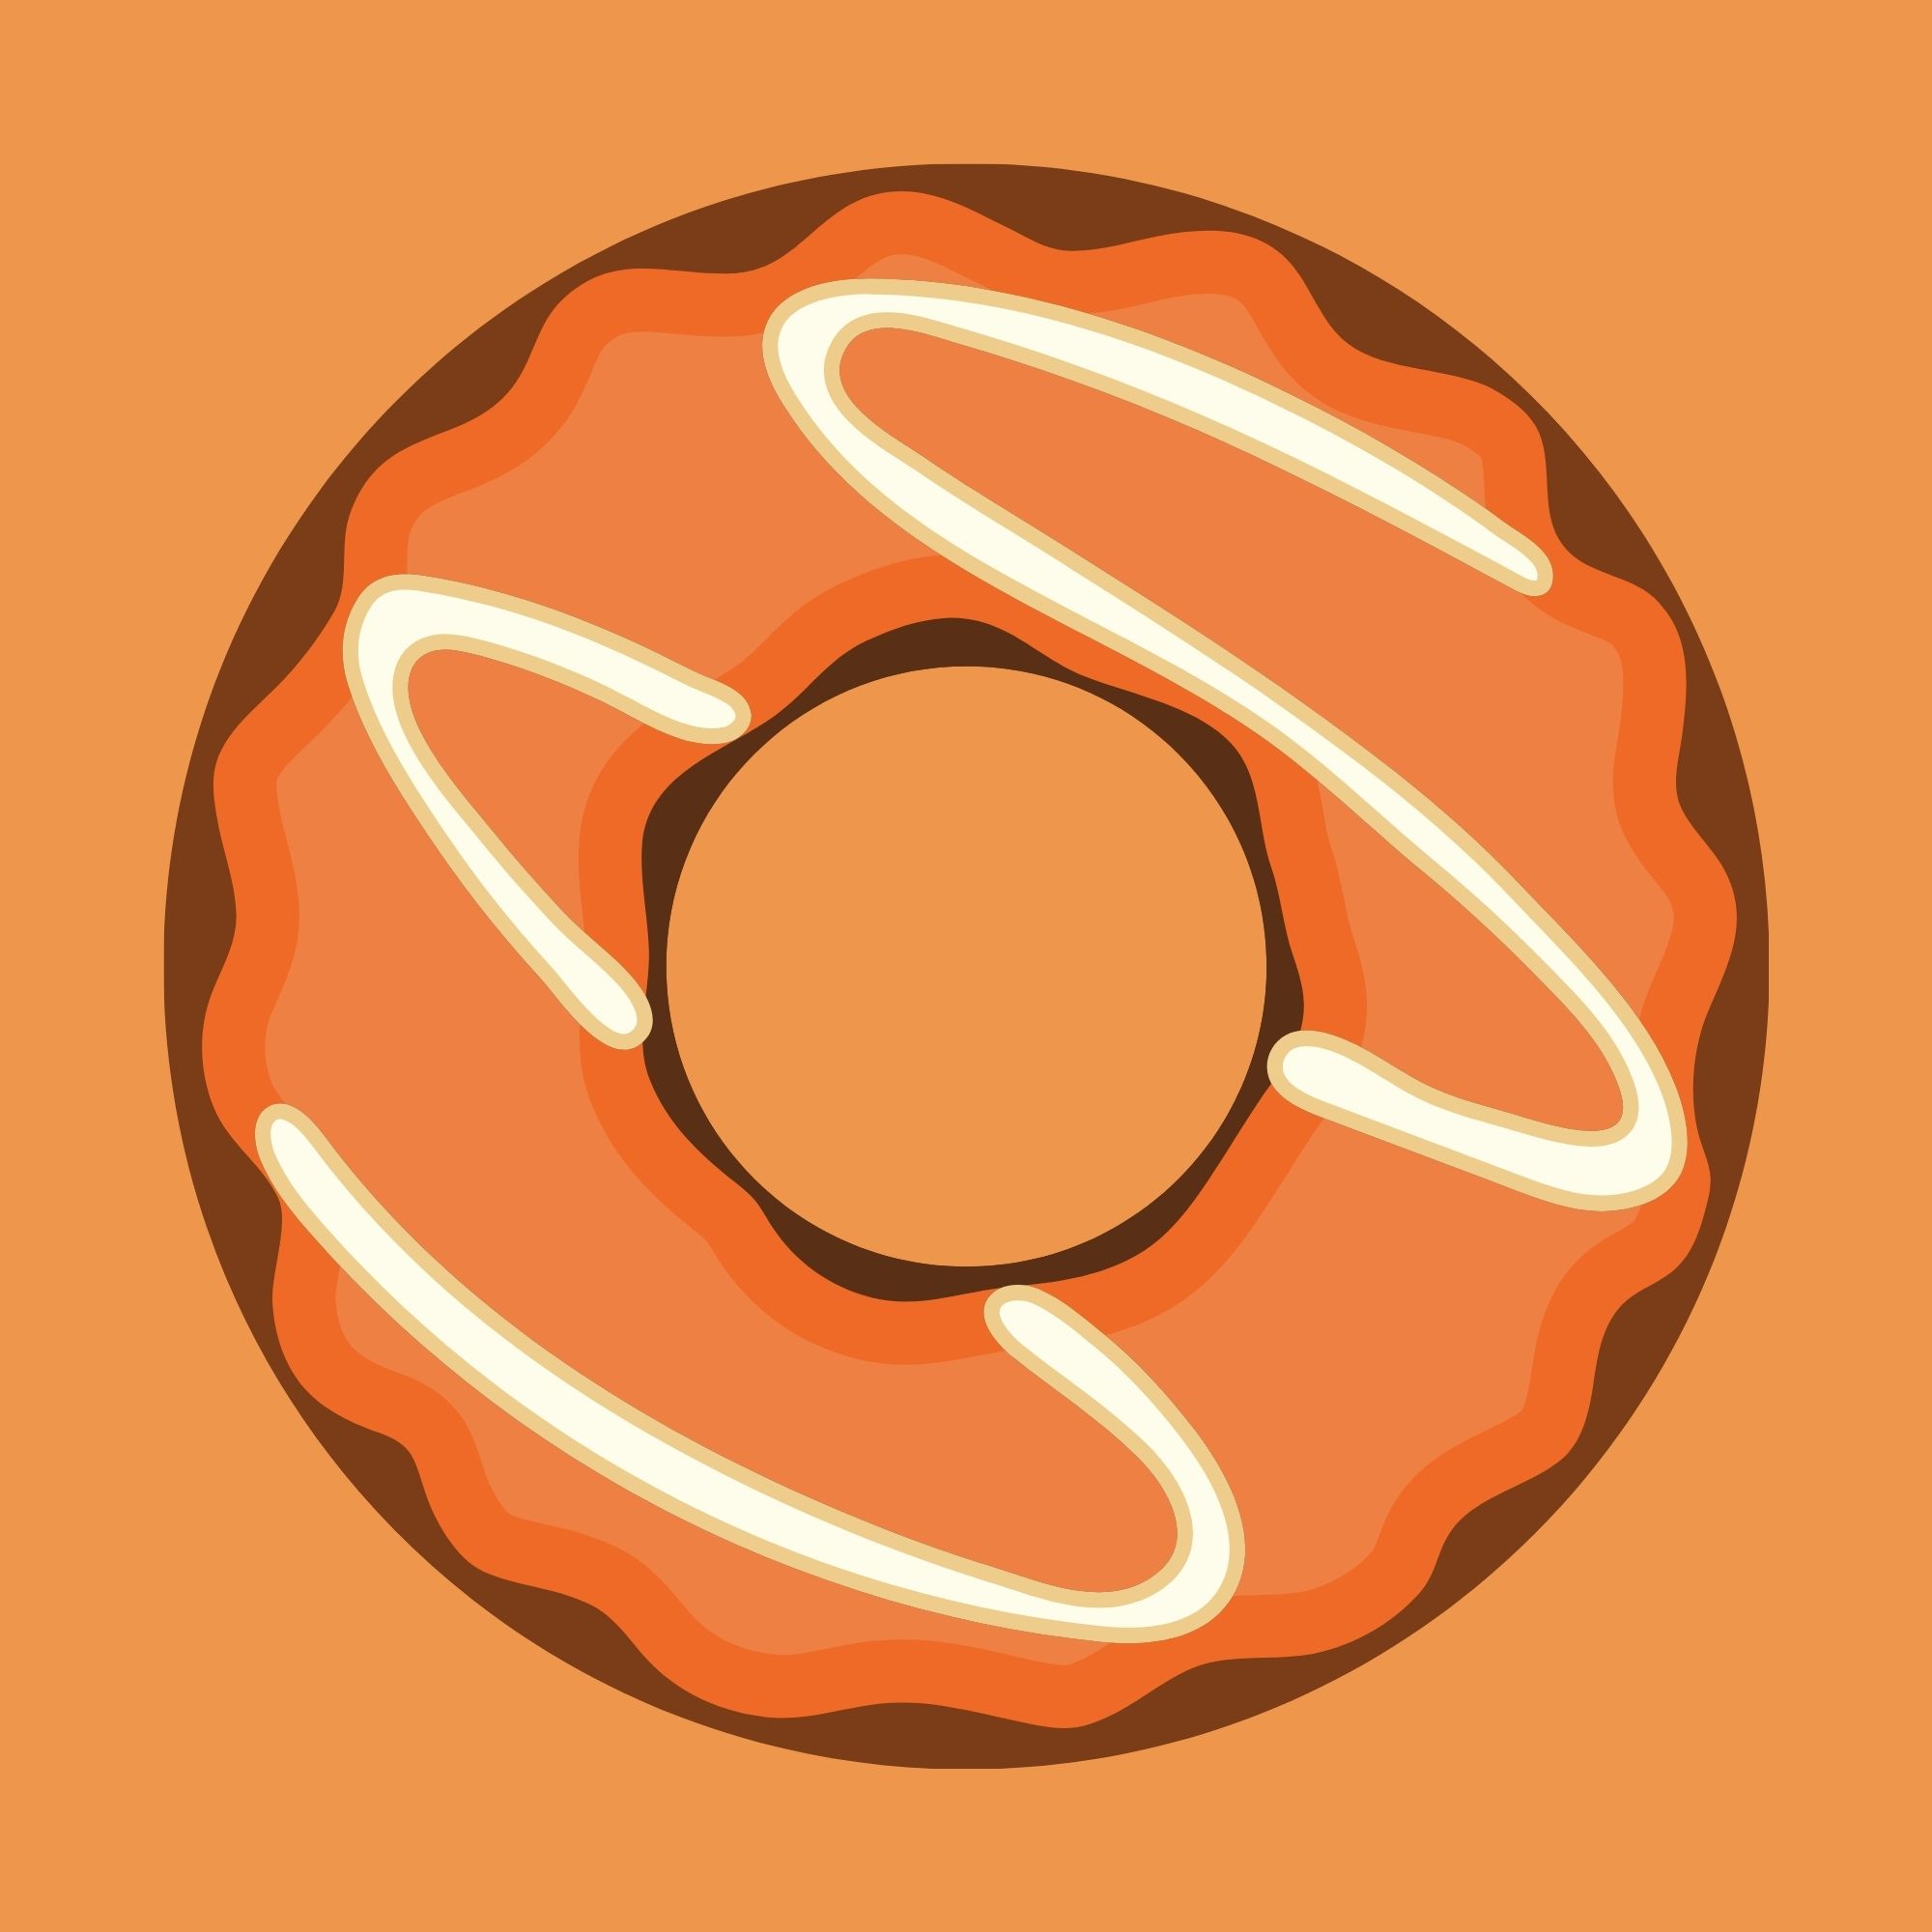 Donut #44 - Poly Donuts | OpenSea